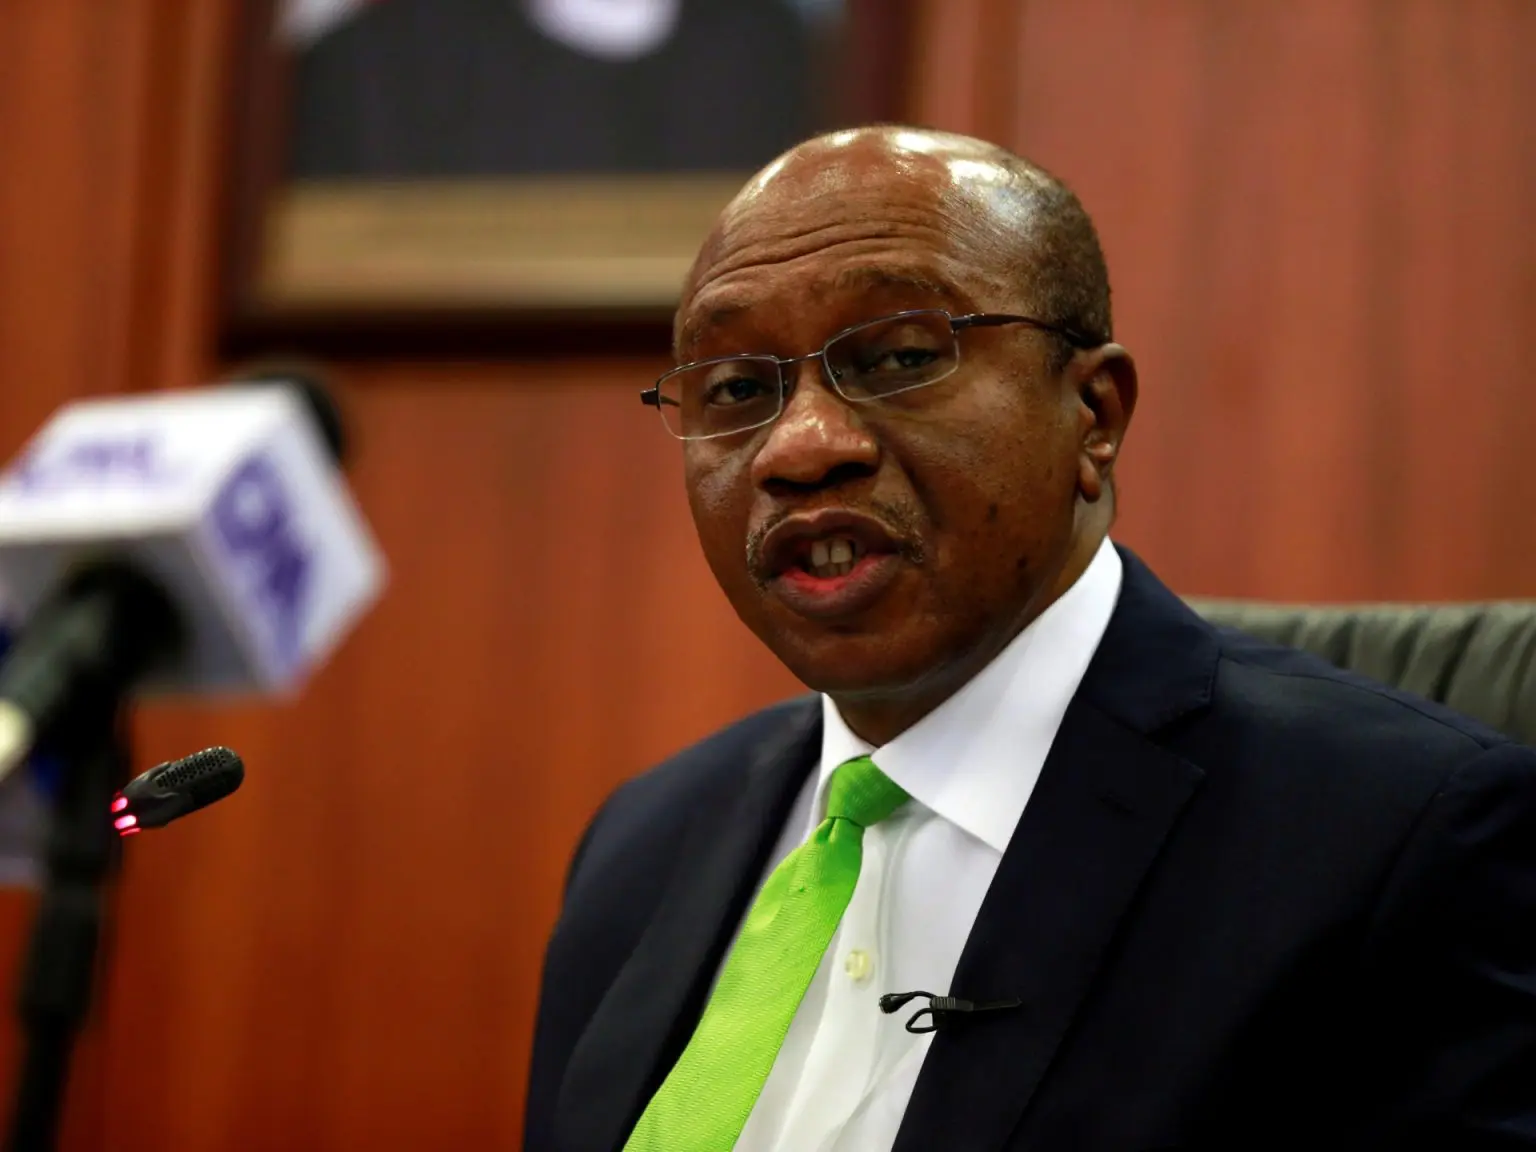 More trouble for Emefiele as forensic analyst confirms forgery in $6.2million case